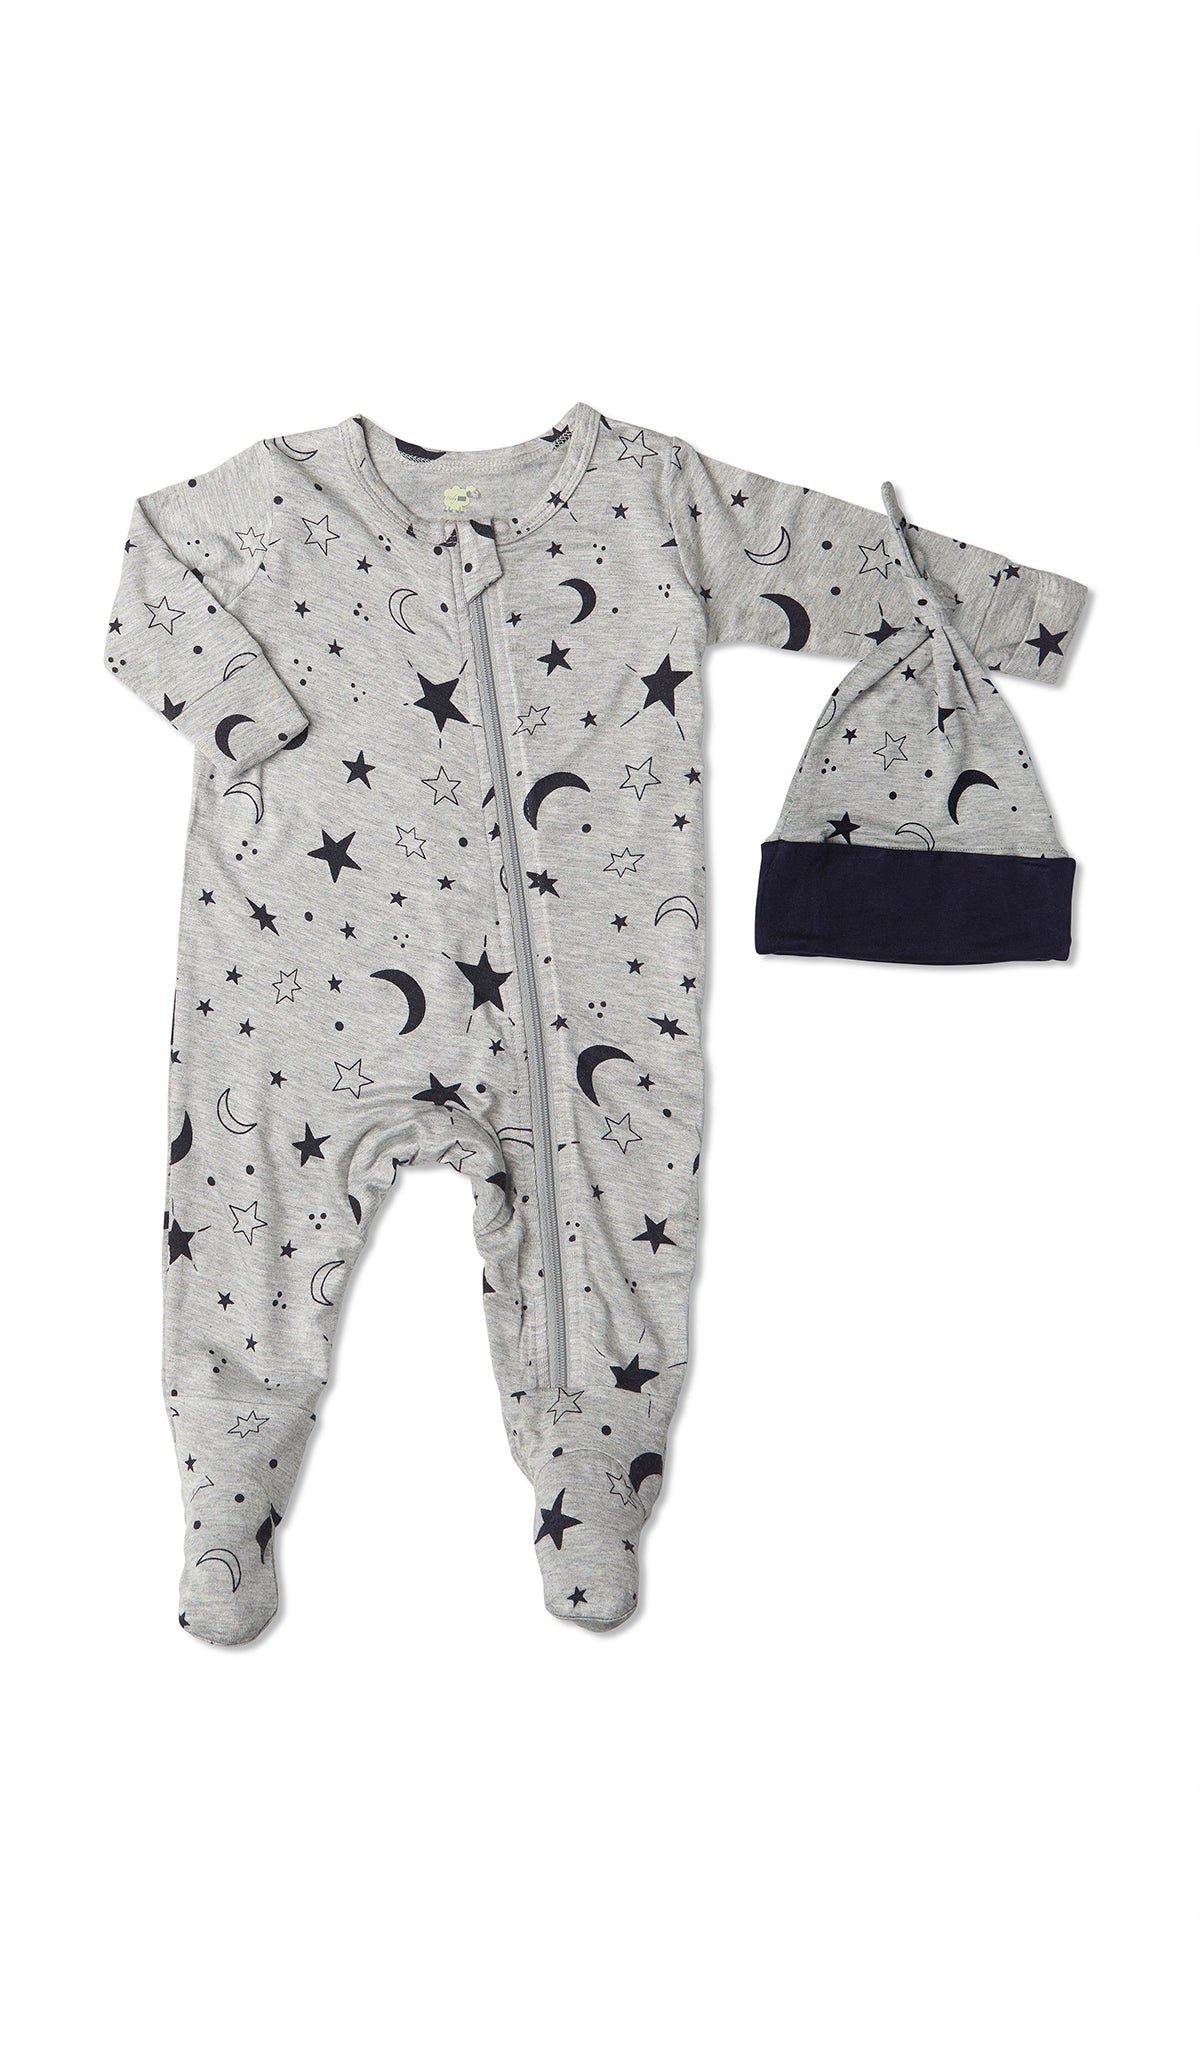 Twinkle Night Footie 2-Piece with long sleeves, zip front and matching knotted baby hat.